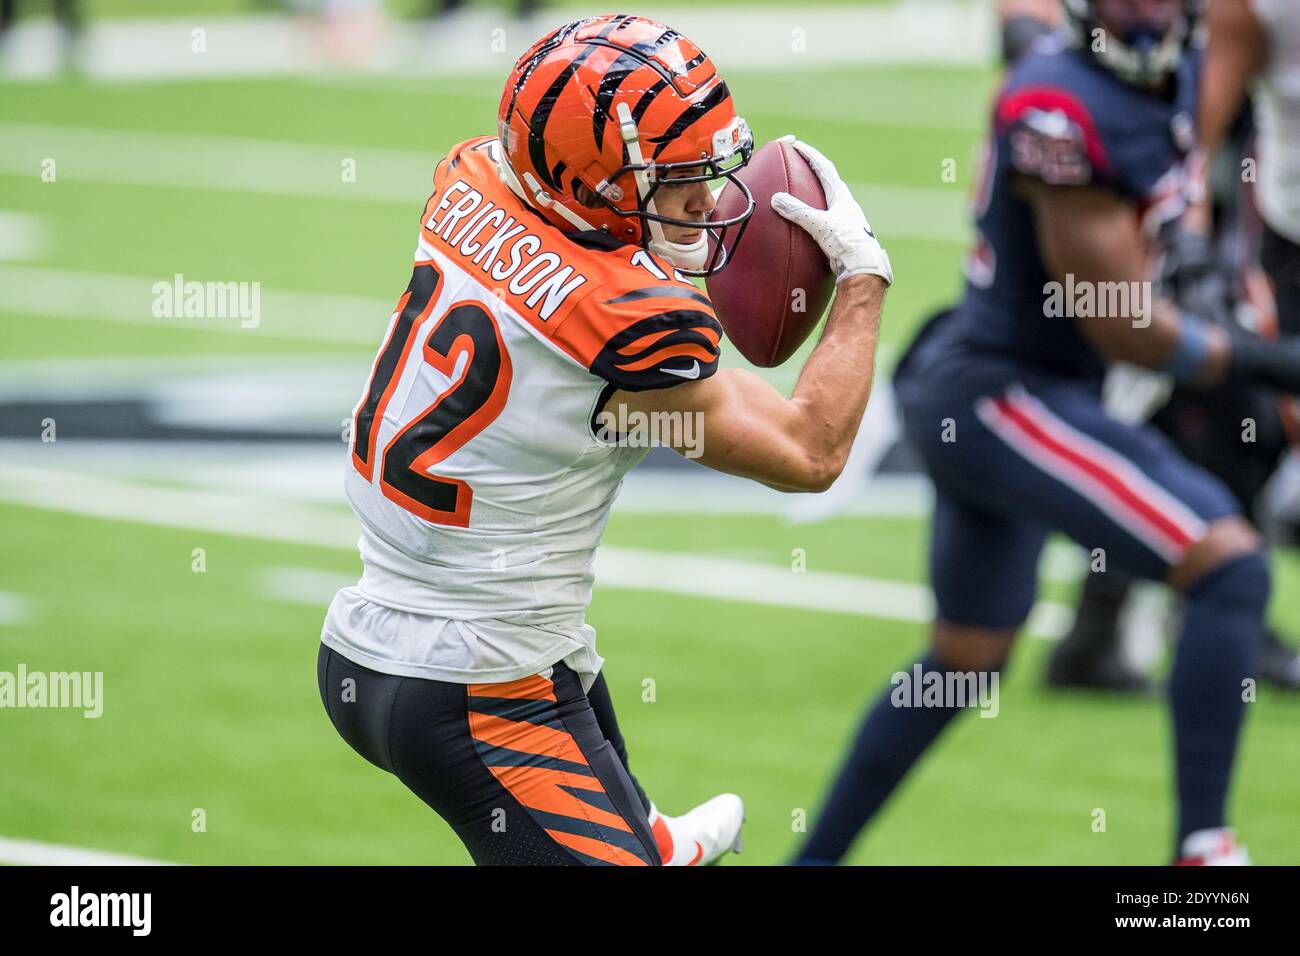 Houston, TX, USA. 27th Dec, 2020. Cincinnati Bengals wide receiver Alex Erickson (12) makes a catch during the 4th quarter of an NFL football game between the Cincinnati Bengals and the Houston Texans at NRG Stadium in Houston, TX. The Bengals won the game 37 to 31.Trask Smith/CSM/Alamy Live News Stock Photo